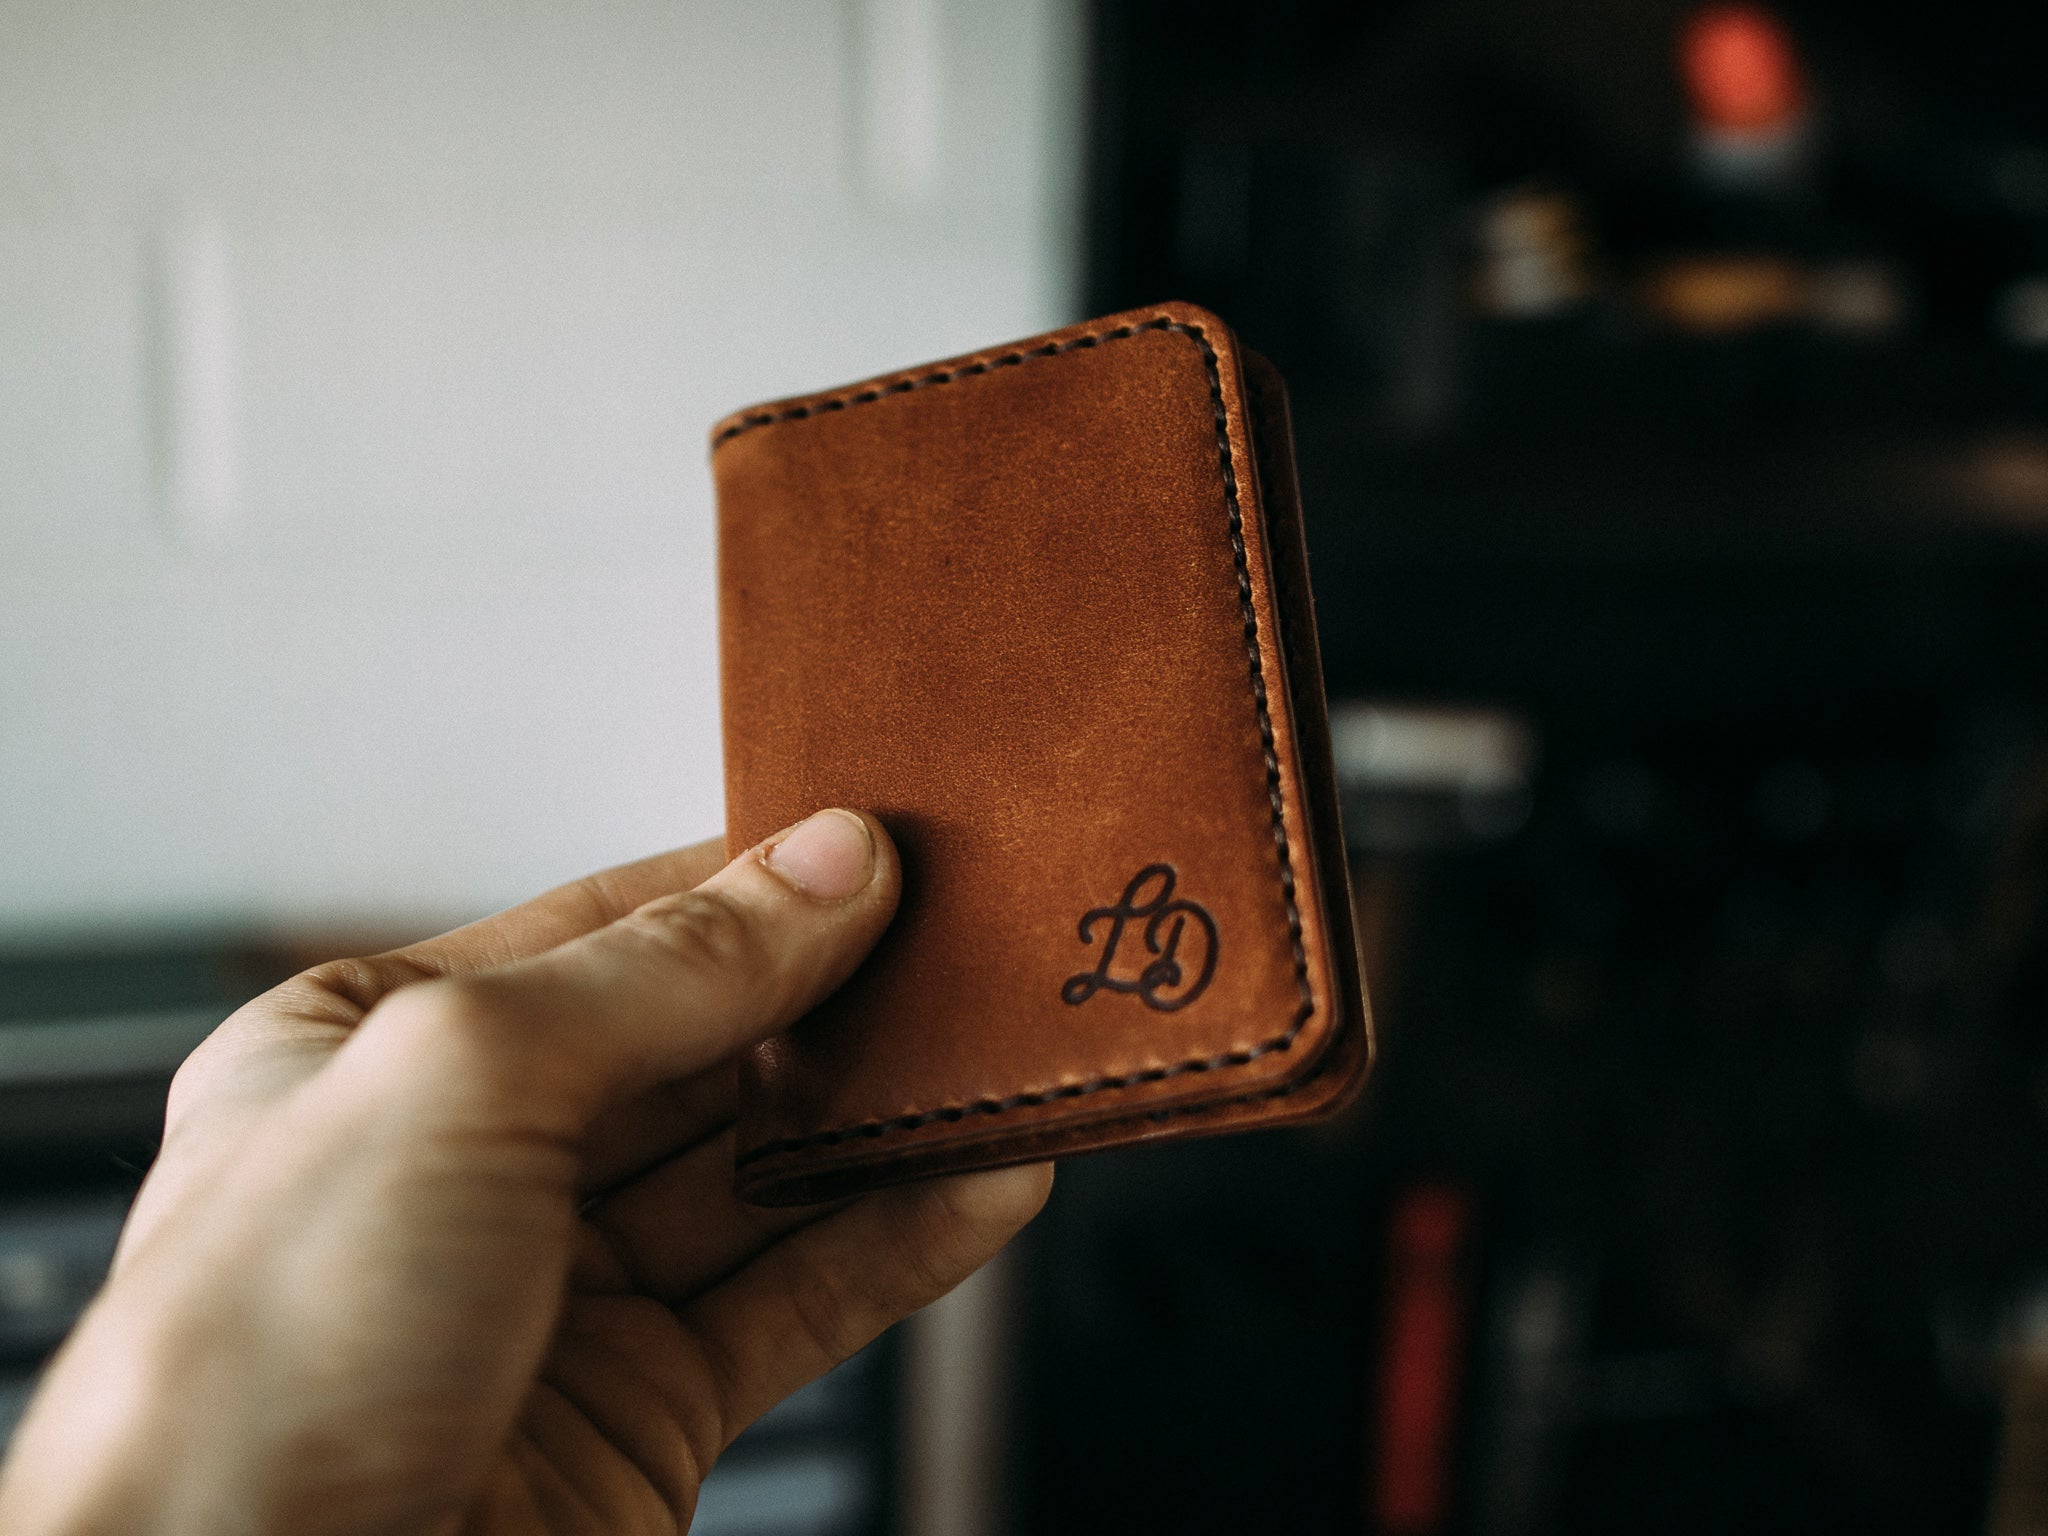 The Skinny Dutchman - Lost Dutchman Leather handmade leather wallets